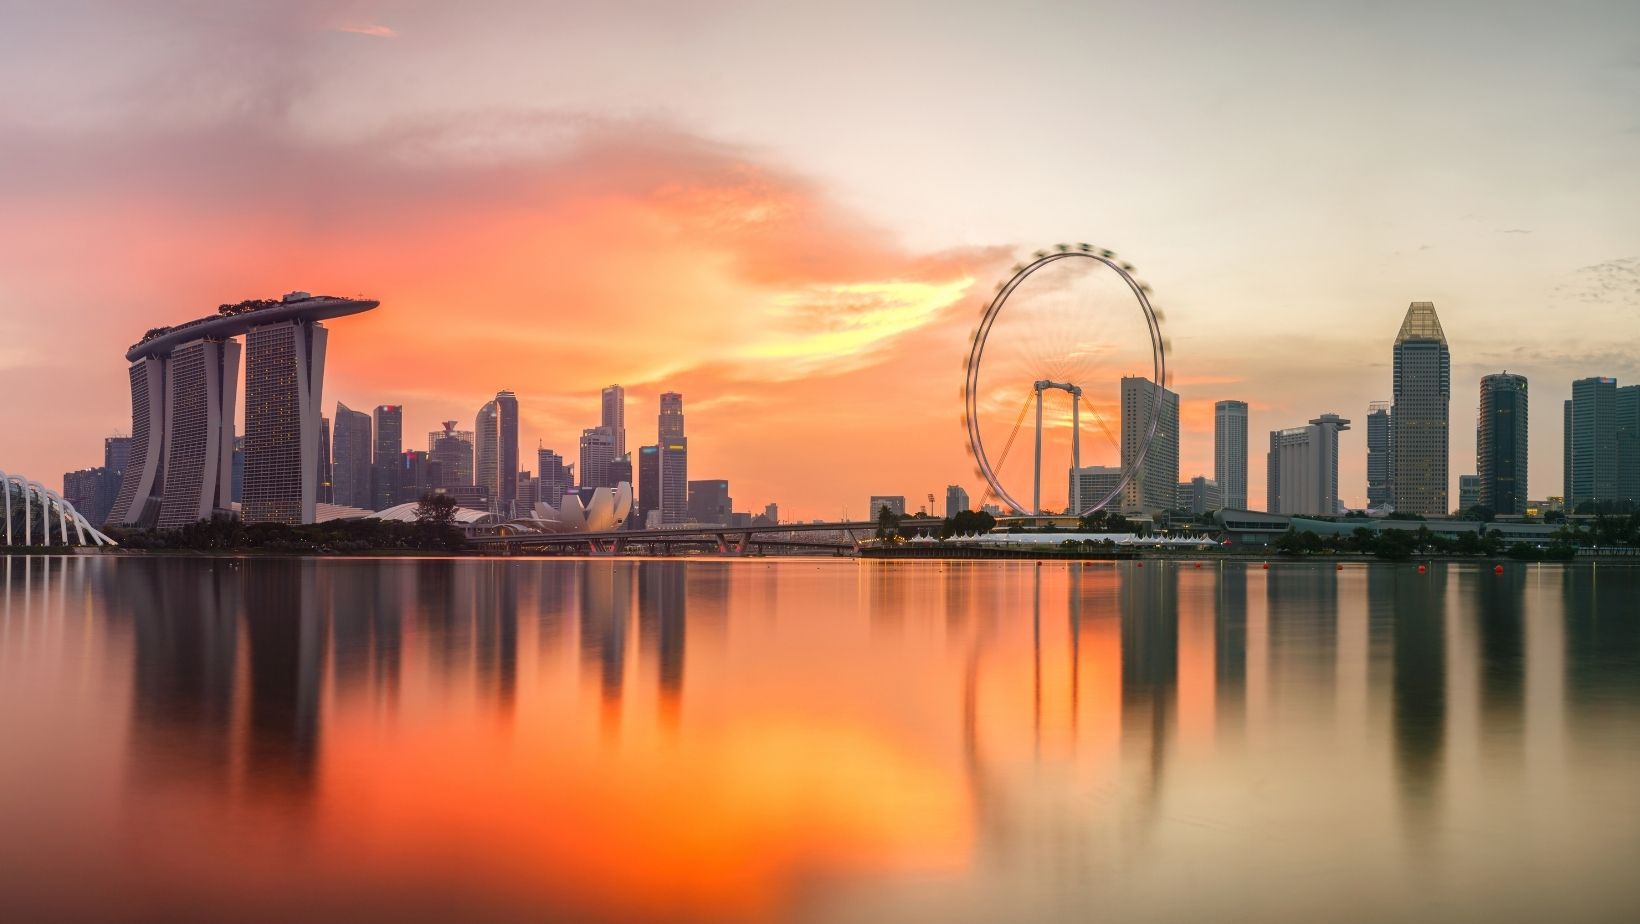 Google’s Best-Rated Tourist Attraction Spots in Singapore